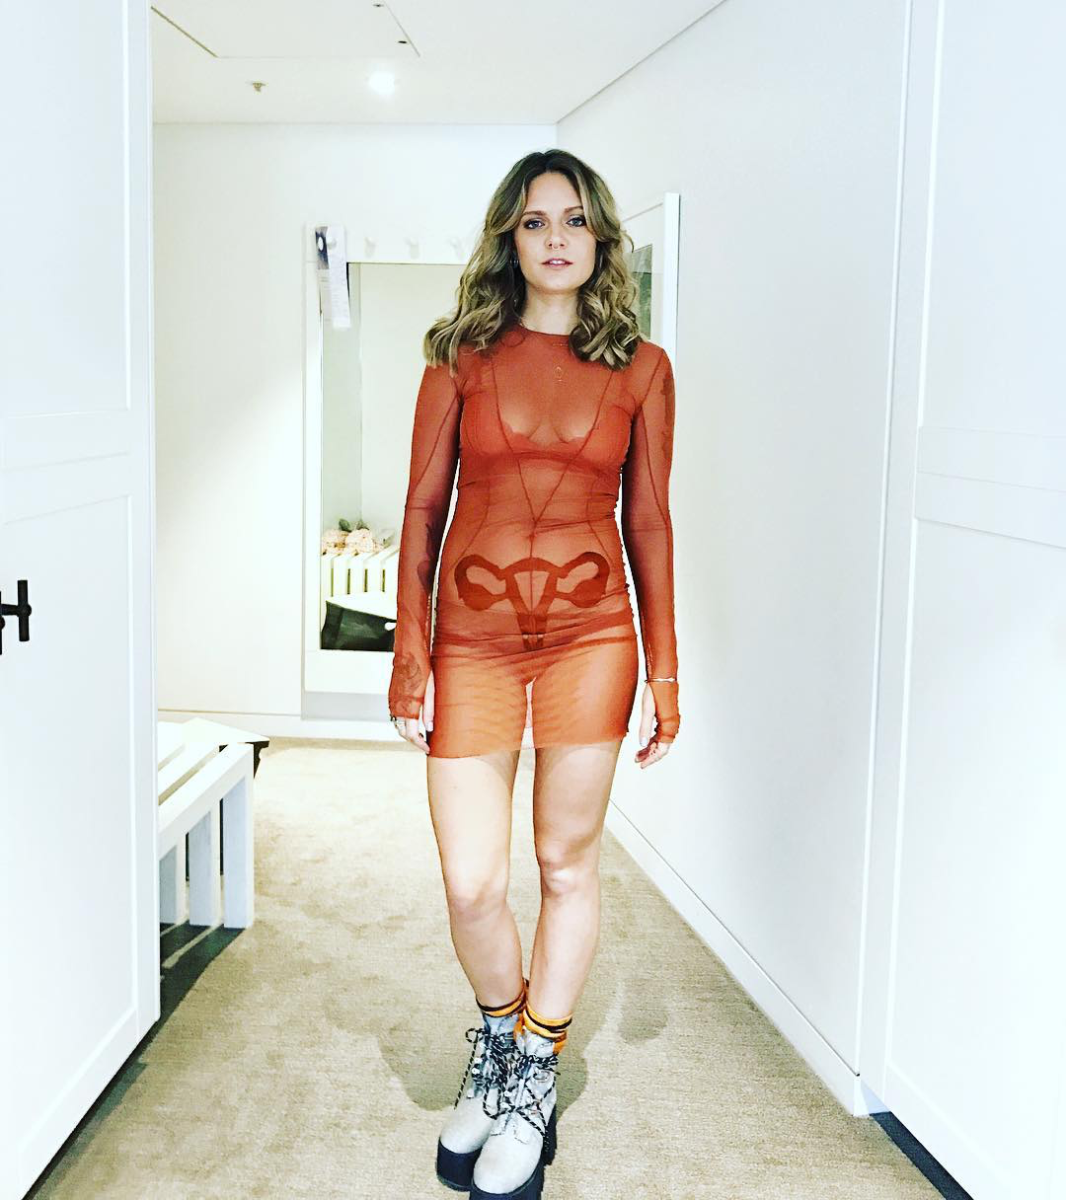 Tove Lo in Emelie Janrell for the 2016 Aria Music Awards. Photo: Instagram/@tovelo